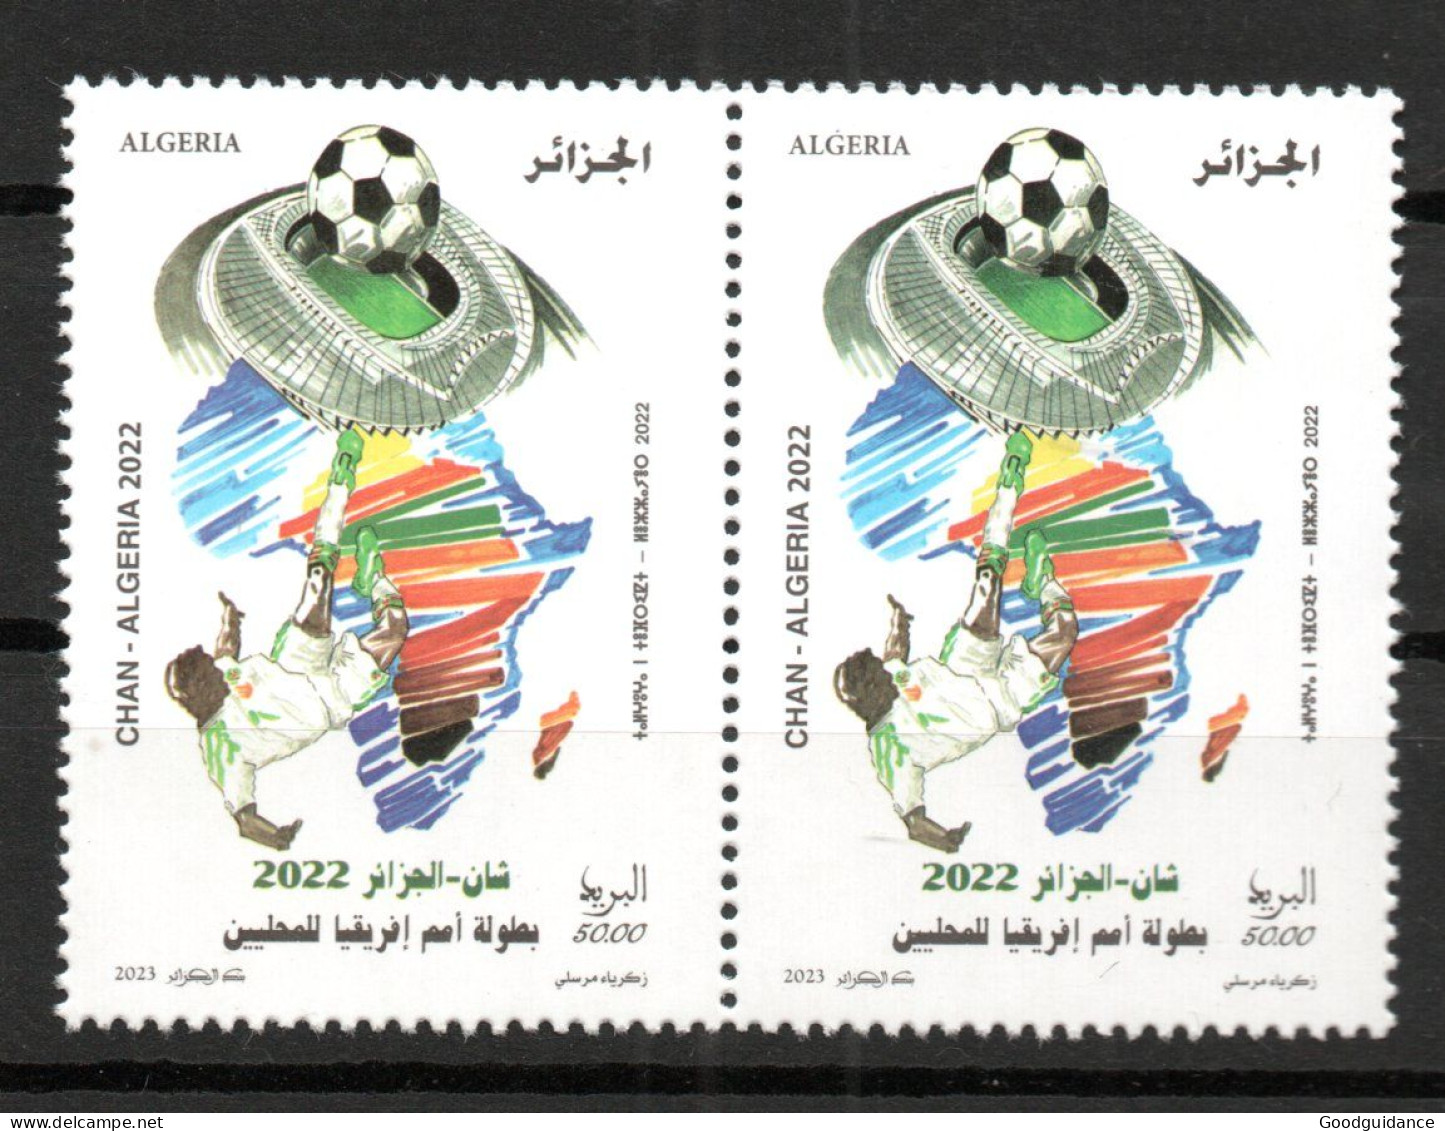 2023 - Algeria - The 7th Africa Cup Of Nations Football Championships 2022- Soccer- Stadium - Map - Pair- Set 1v.MNH** - Coppa Delle Nazioni Africane